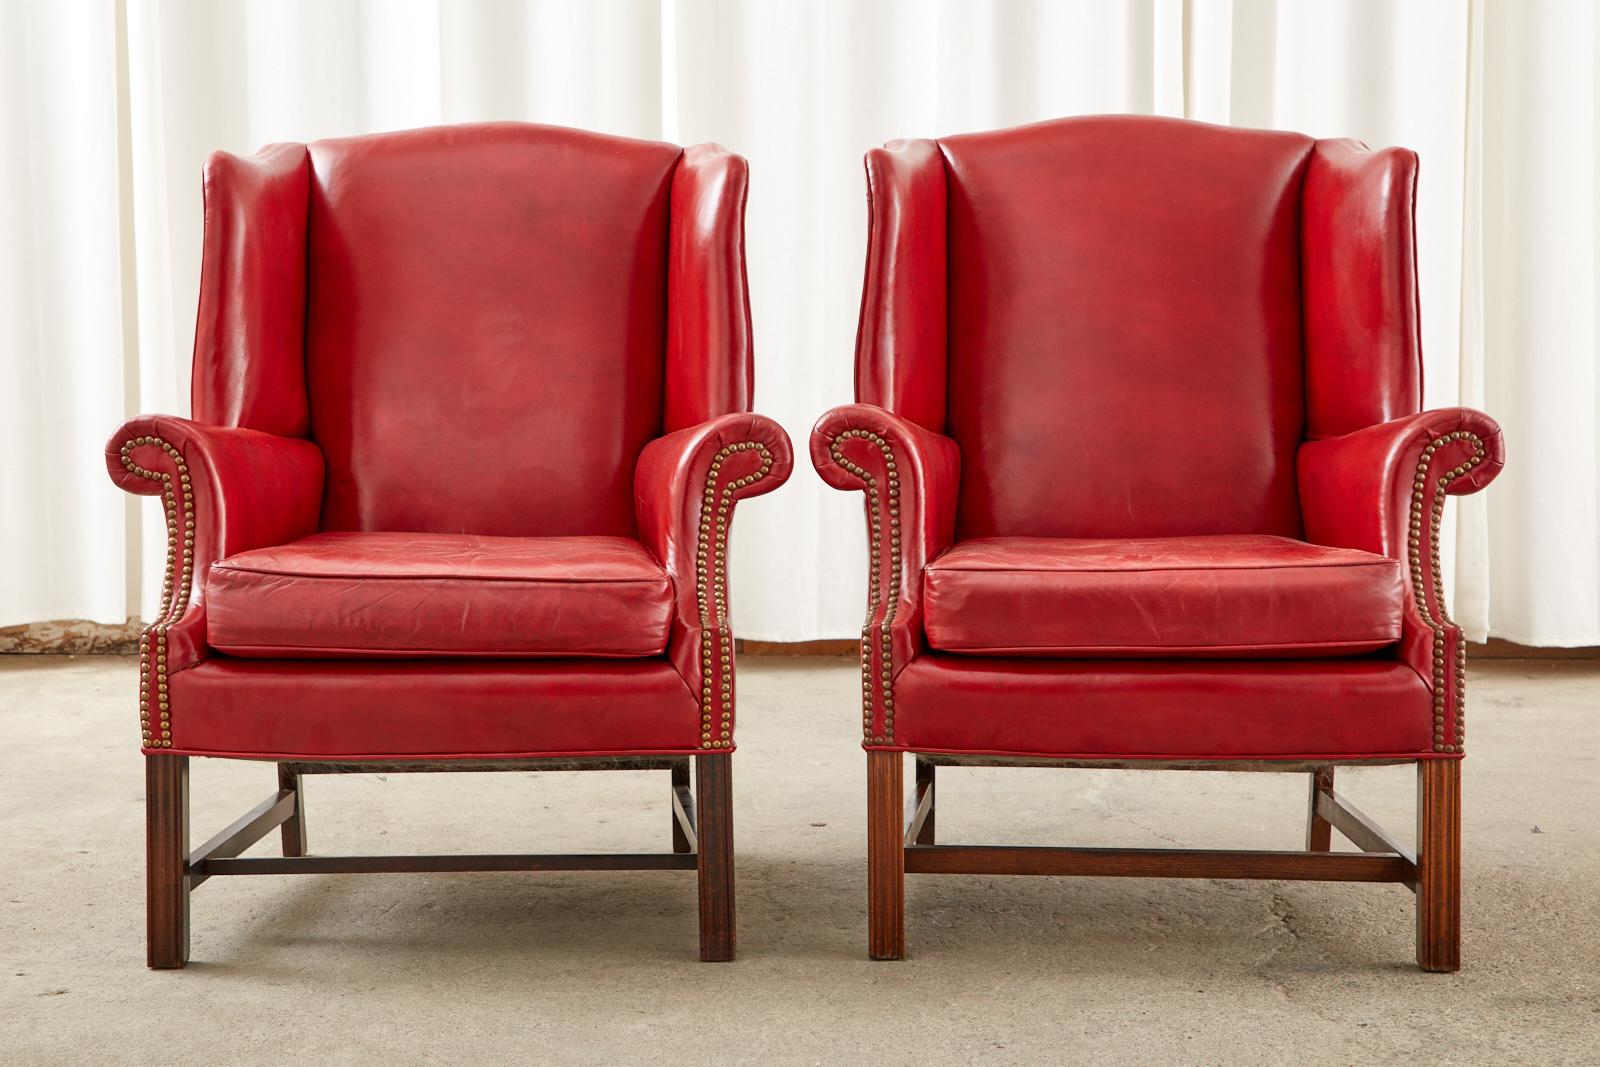 Stunning pair of mid-century leather wingback chairs or wing chairs featuring a dramatic ruby red leather upholstery. Made in the grand English Georgian taste with a mahogany hardwood frame. The chairs have large fully developed wings conjoined to